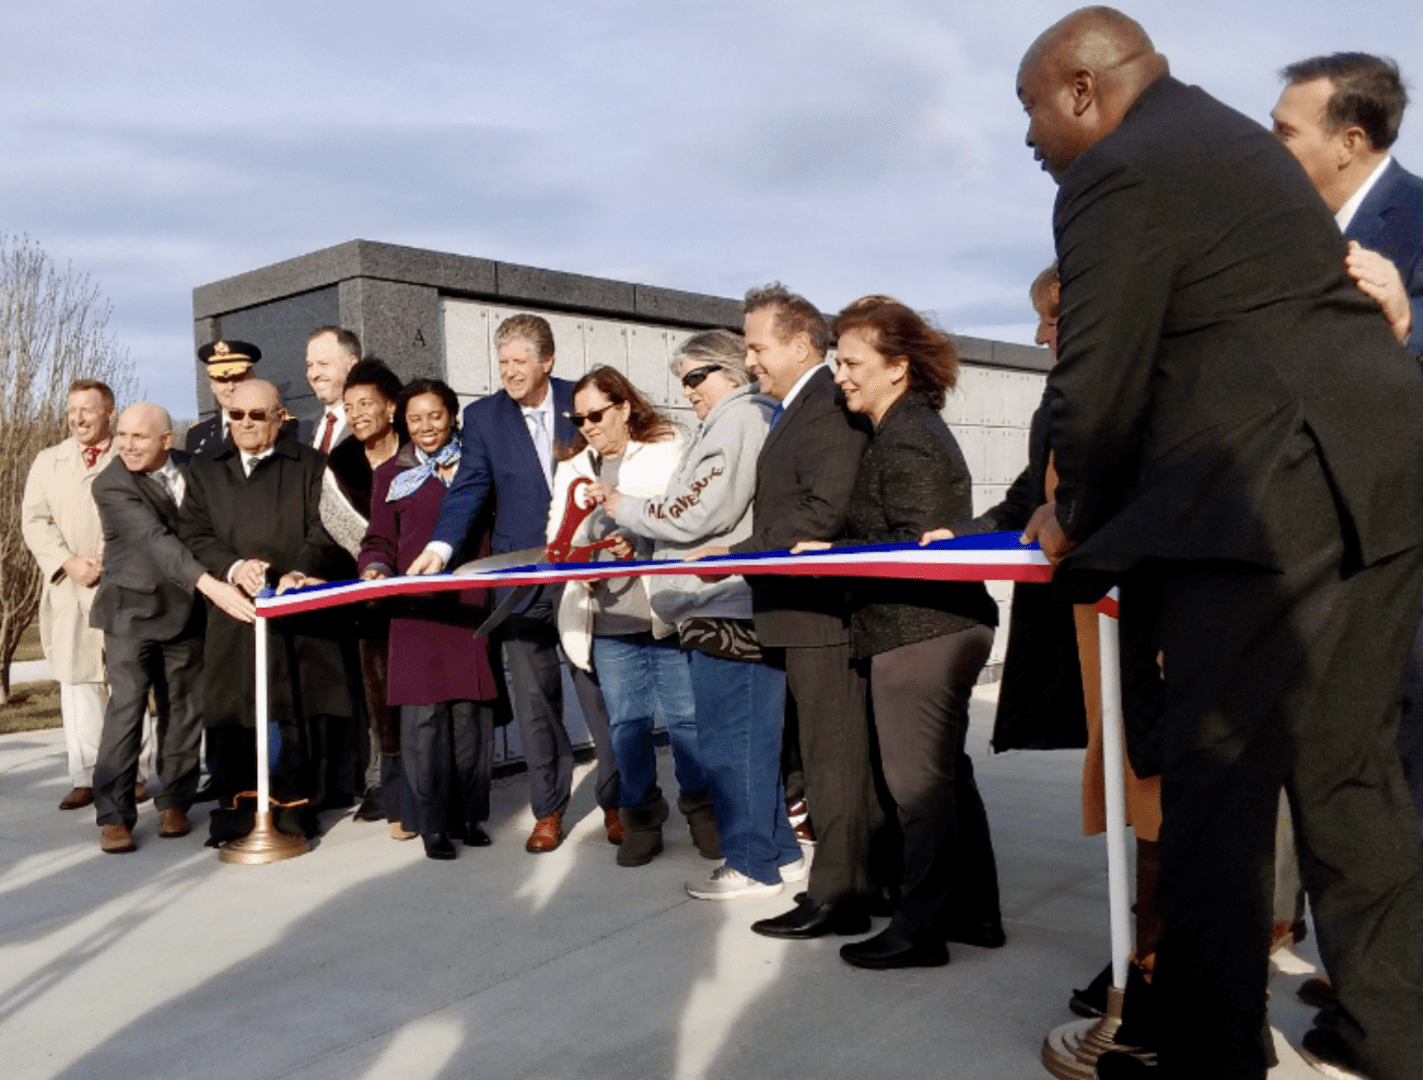 A group of people cutting a ribbon in front of a building.